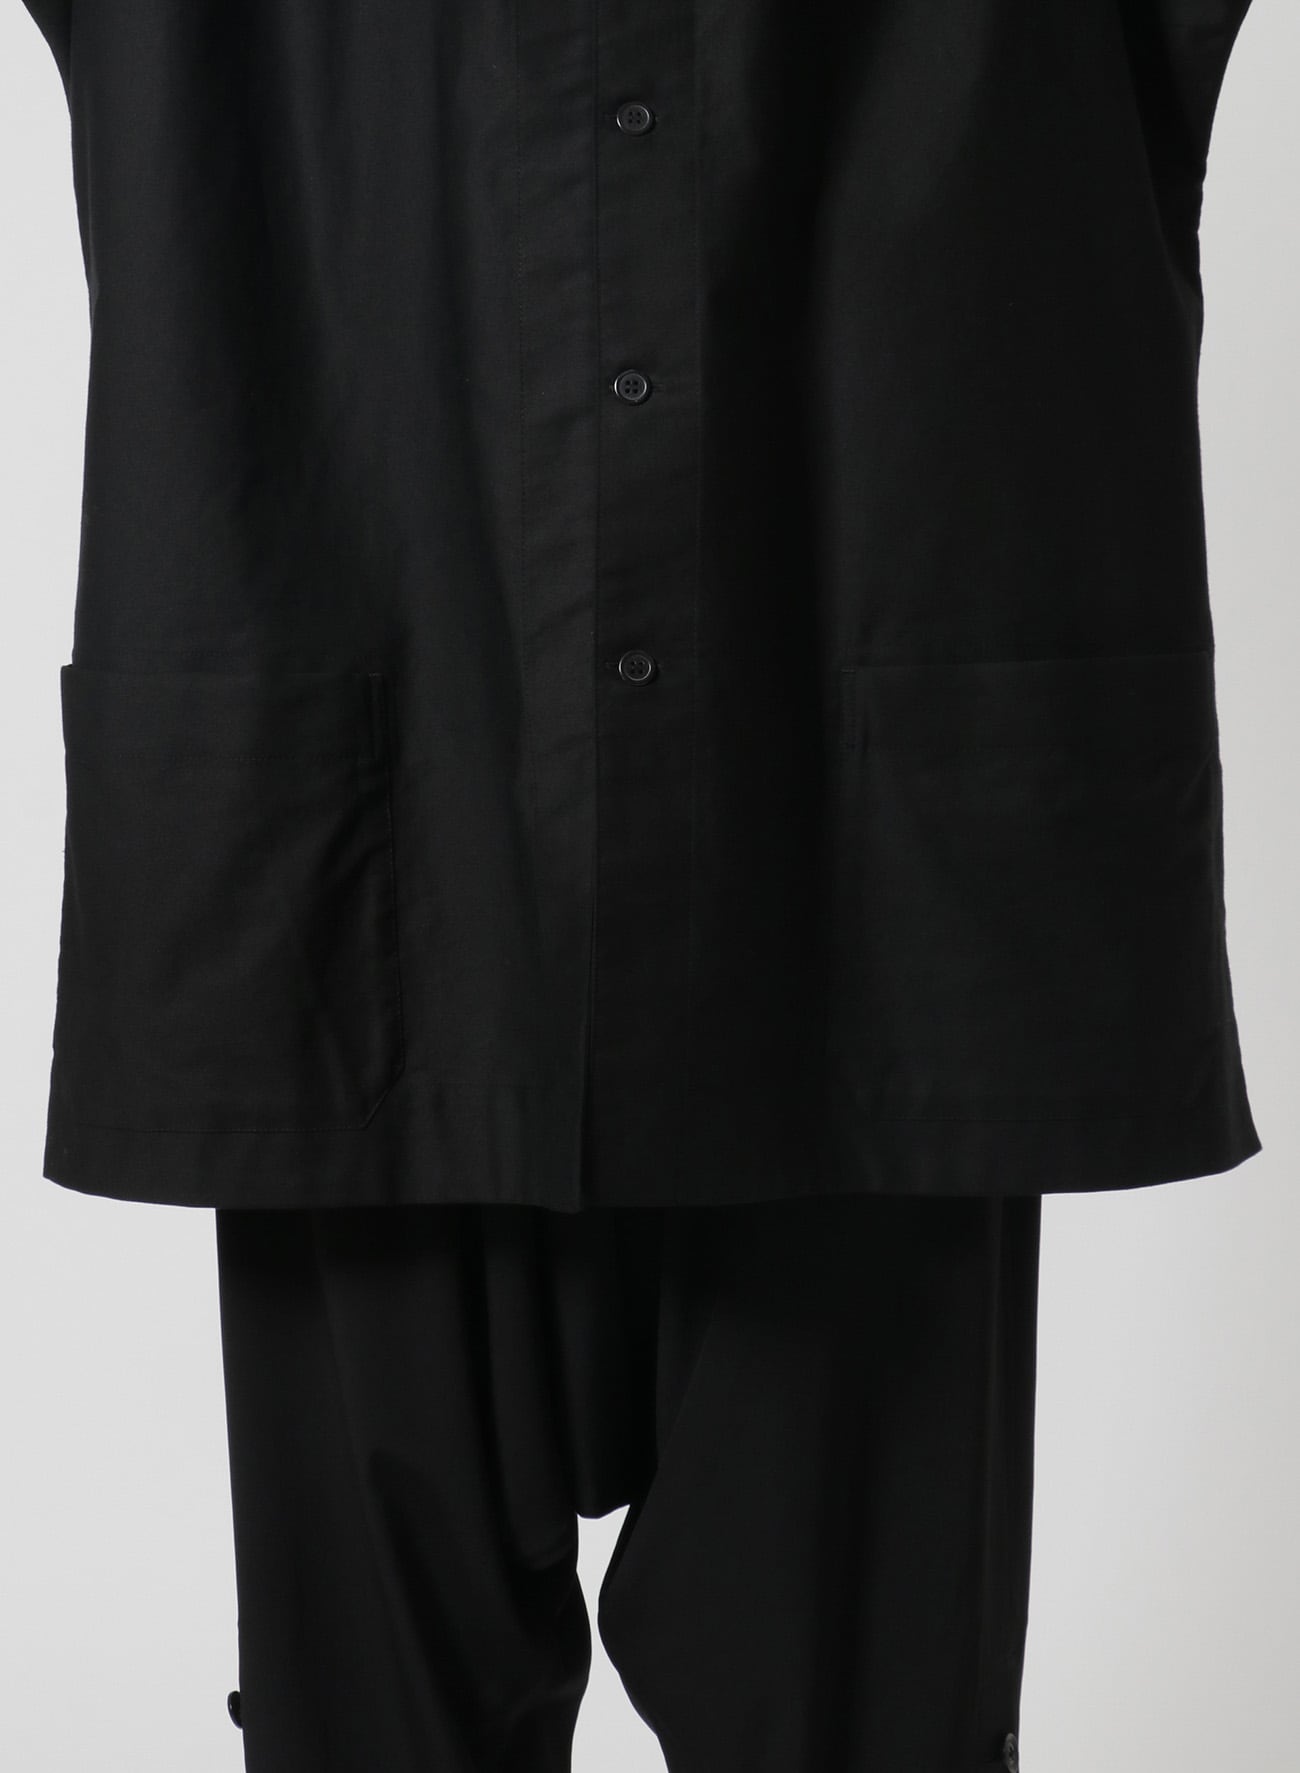 [Y's-Black Name] BLACK TWILL CHINESE STYLE SHIRT